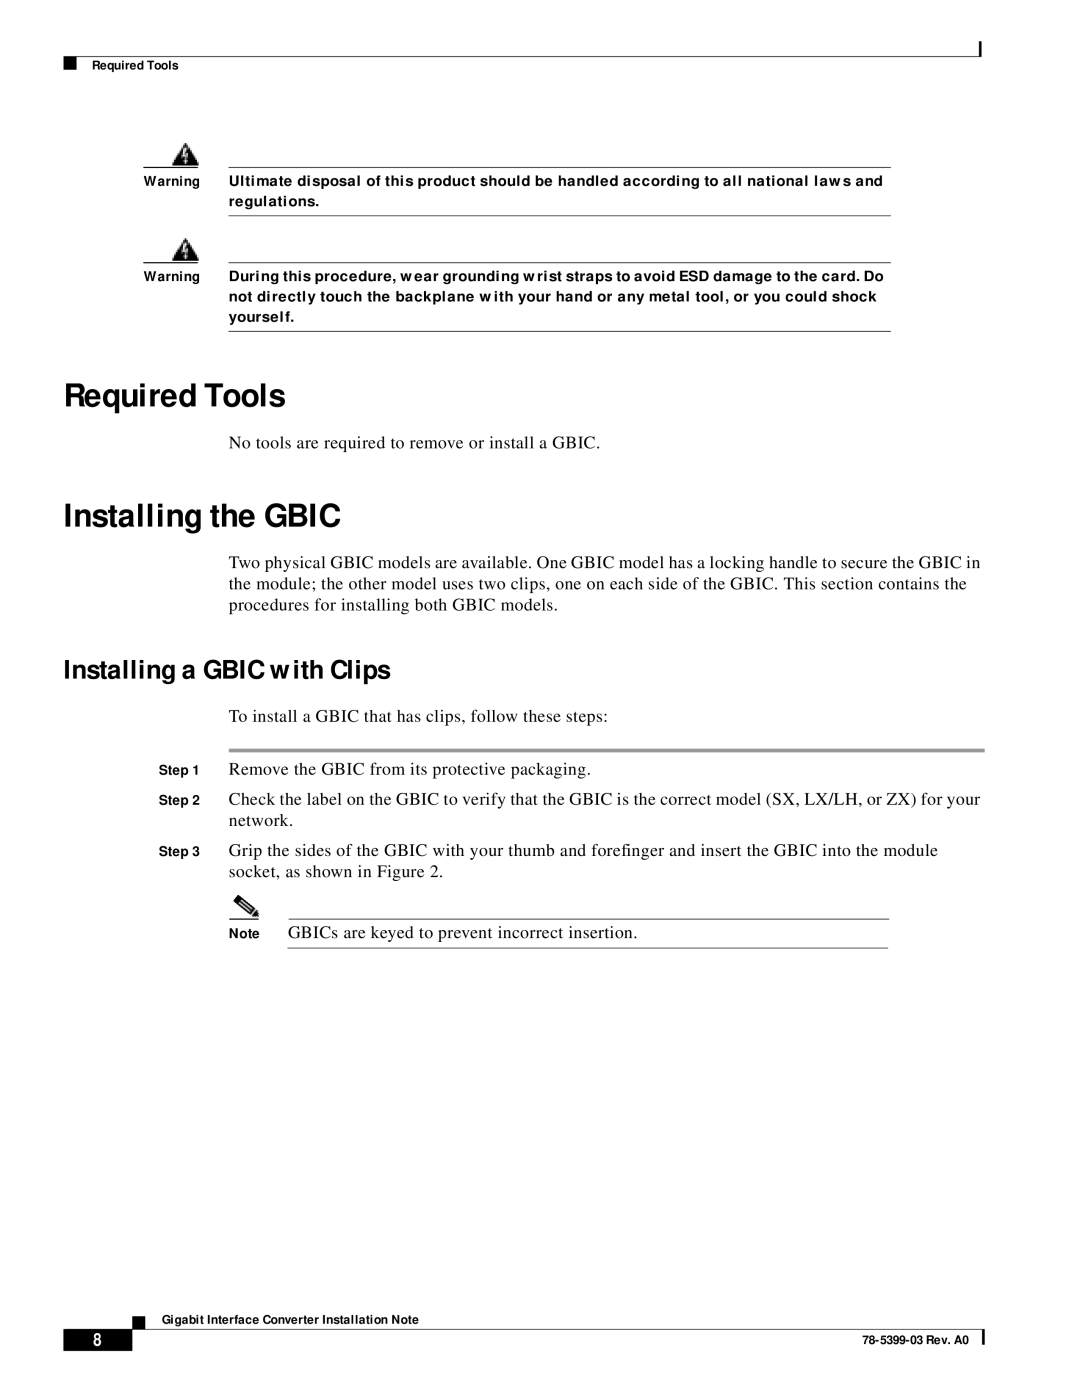 Cisco Systems WS-G5486, WS-G5487, WS-G5484 Required Tools, Installing the GBIC, Installing a GBIC with Clips 